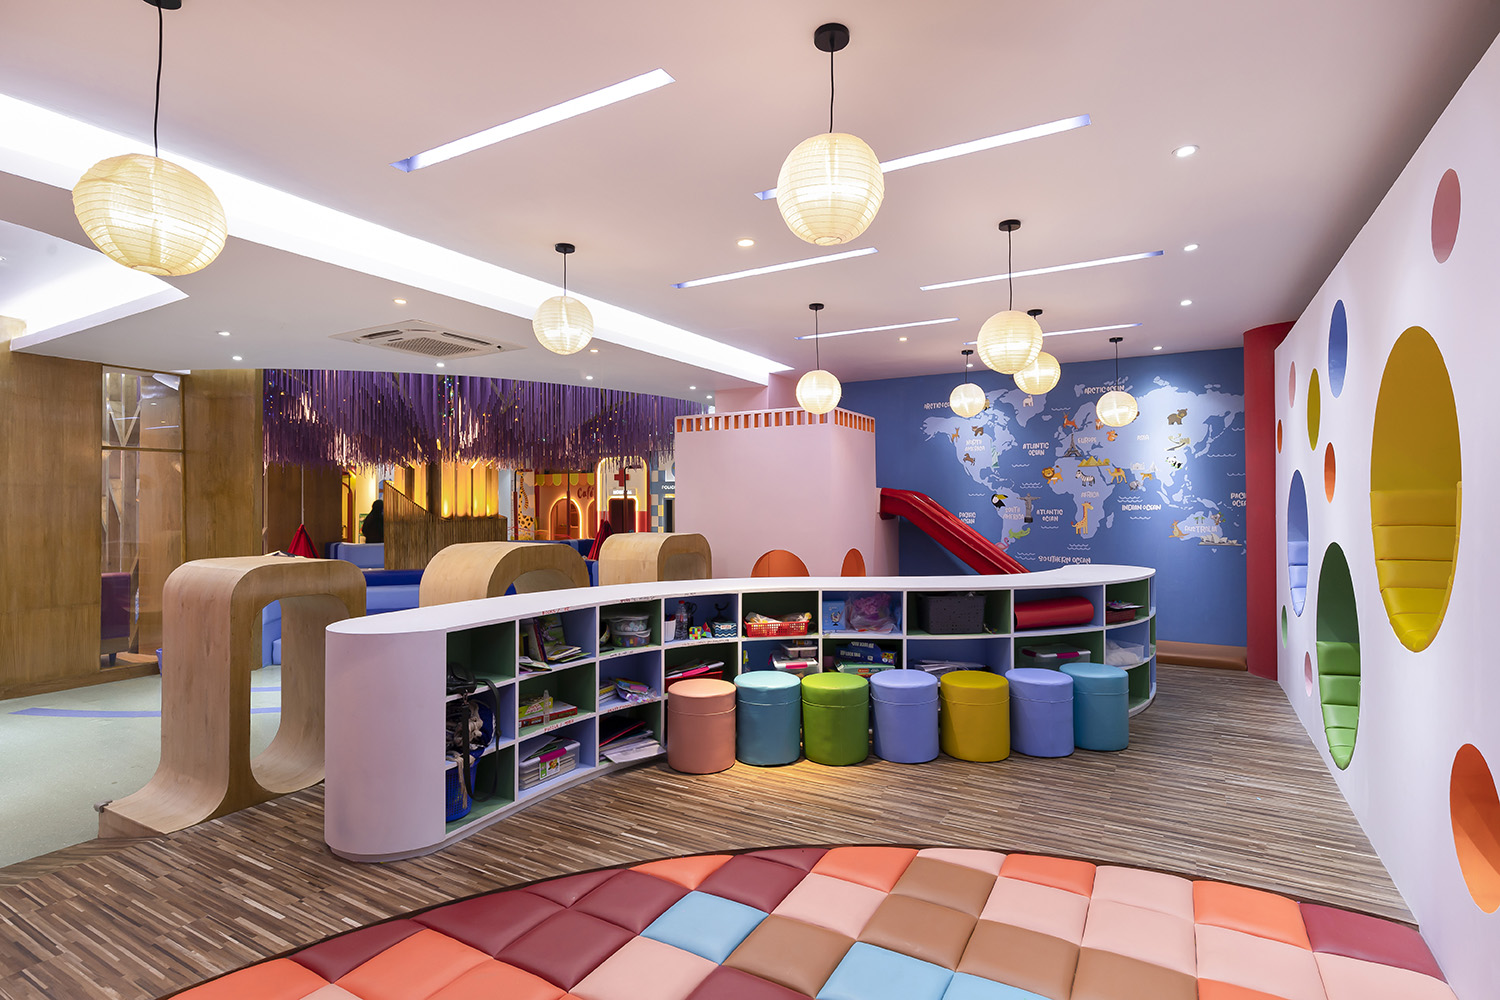 Creative Kids: An Accessible Inclusive Indoor Playground